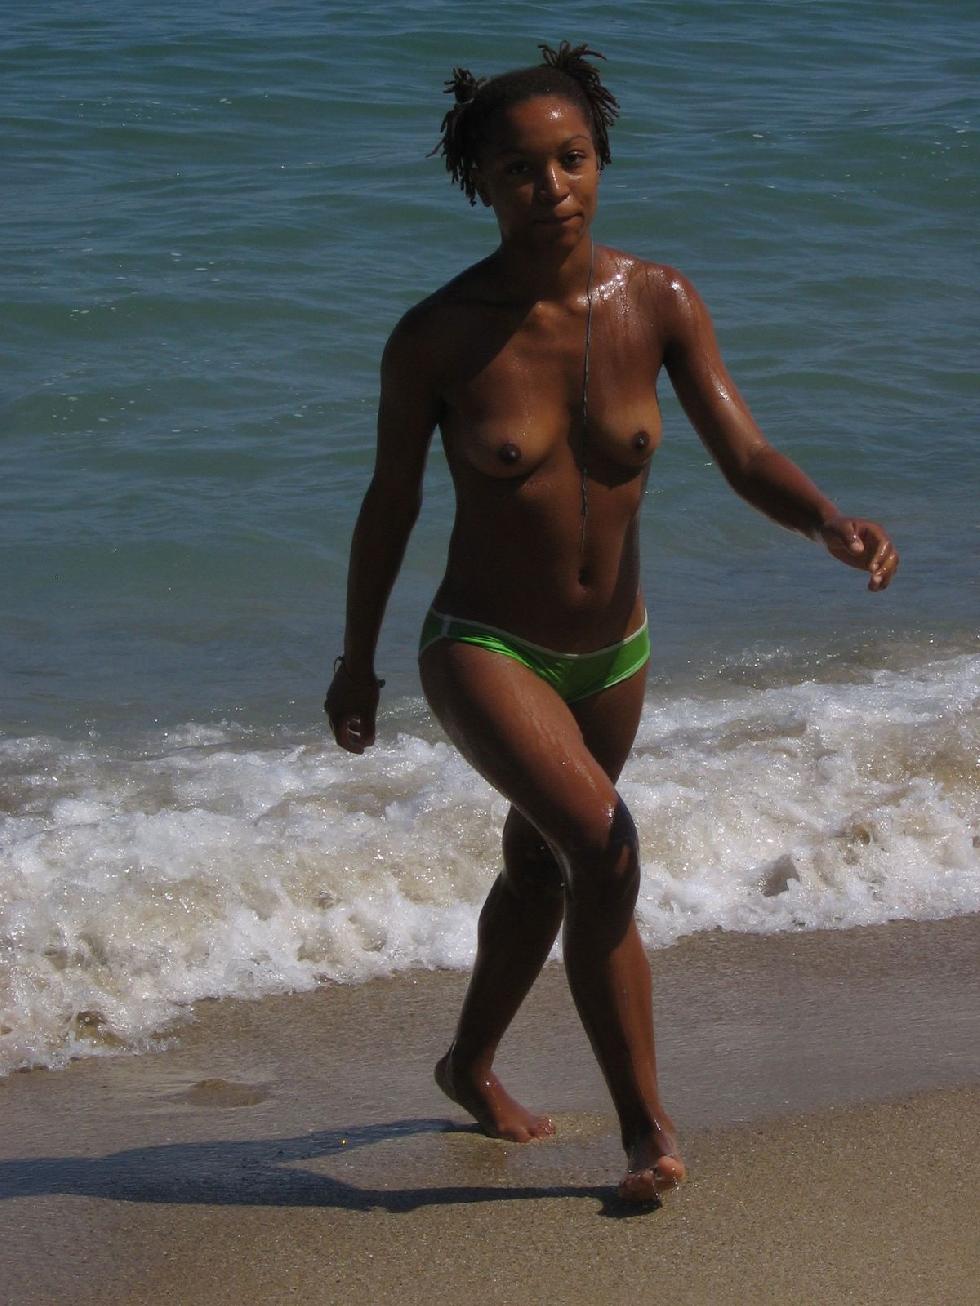 Topless and nude amateurs on the beach. Part 1 - 22